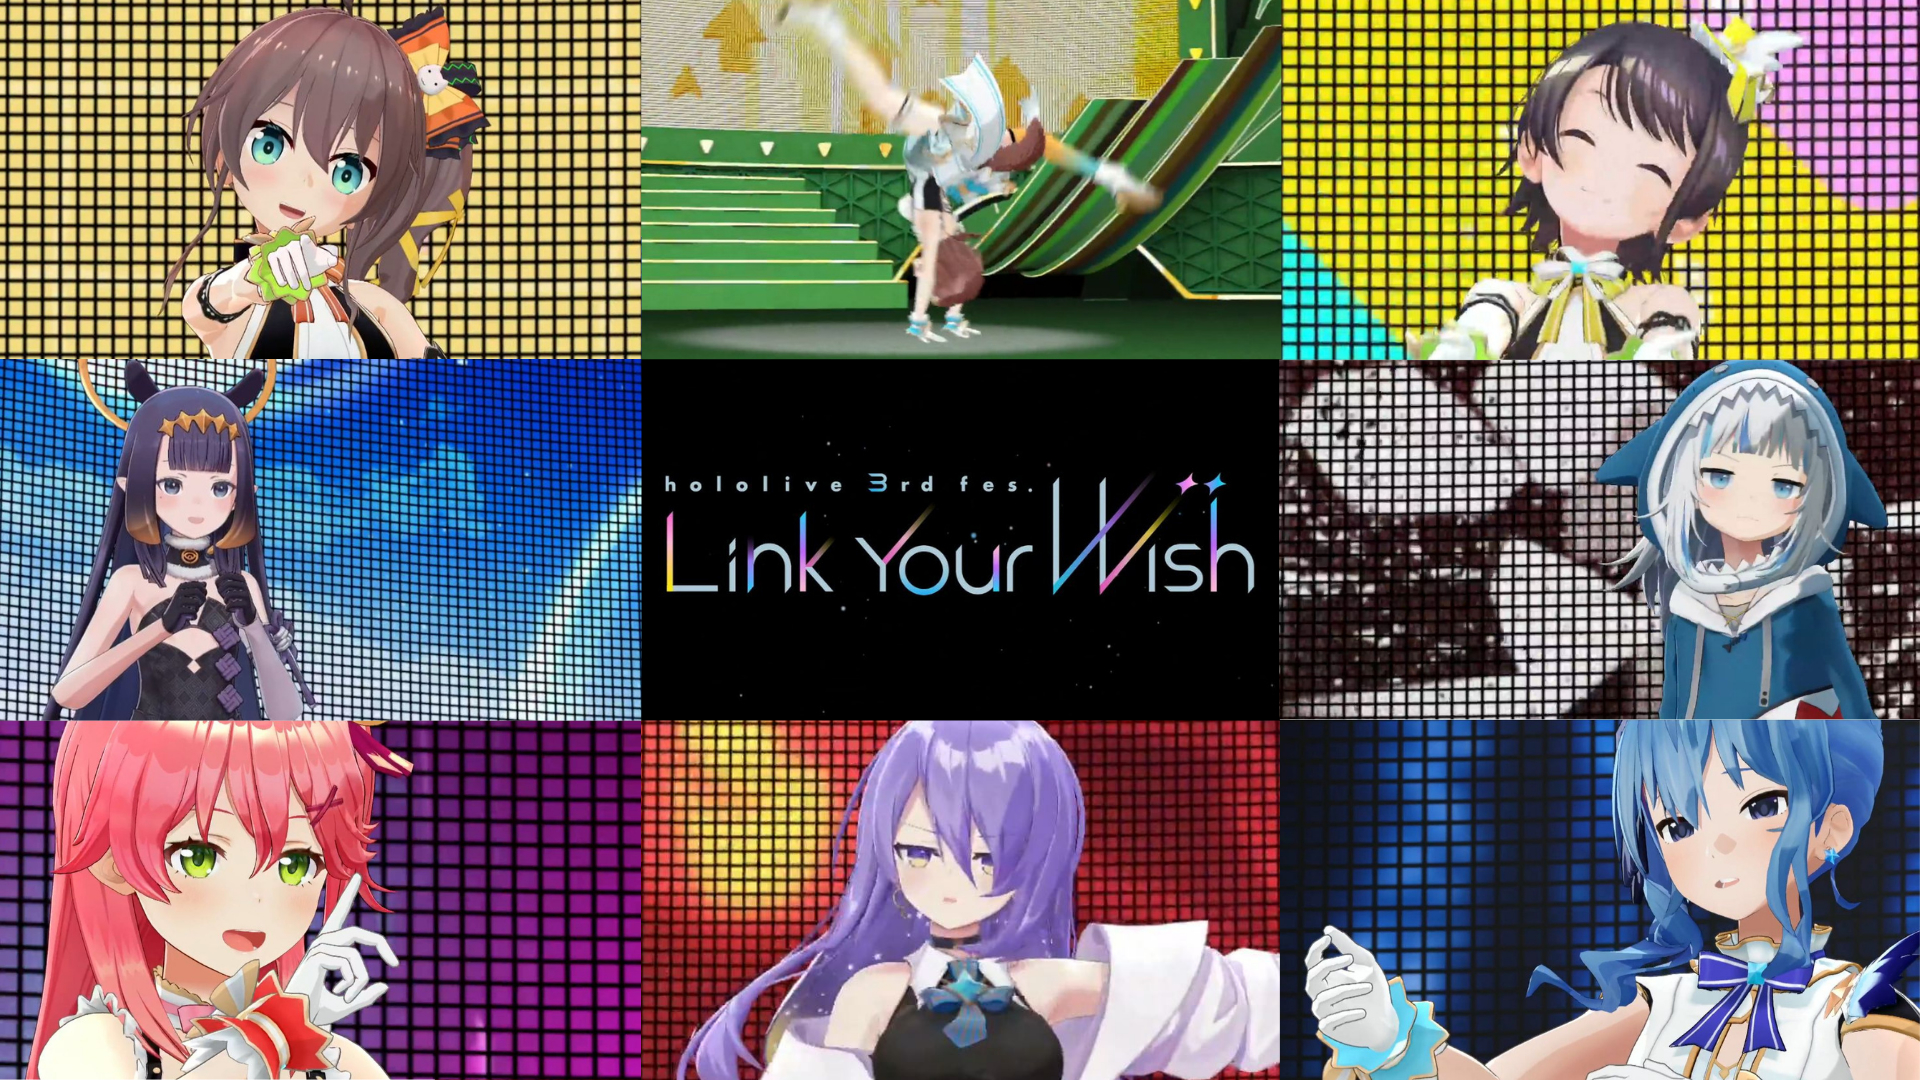 hololive-3rd-fes.-Link-Your-Wish